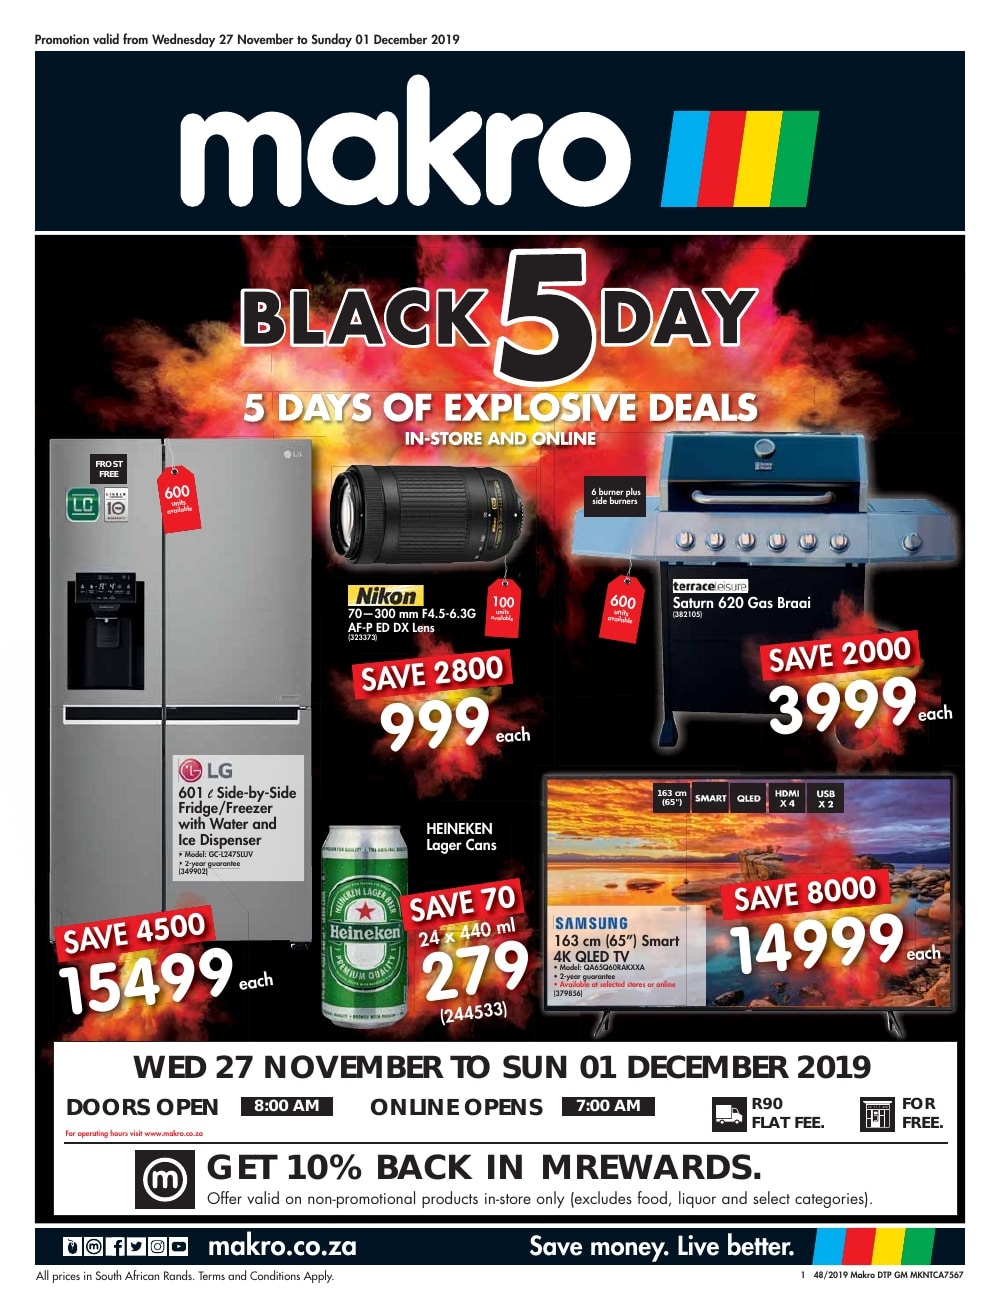 Makro Black Friday Specials & Deals 2020 - What Stores Have Black Friday Sales All Weekend